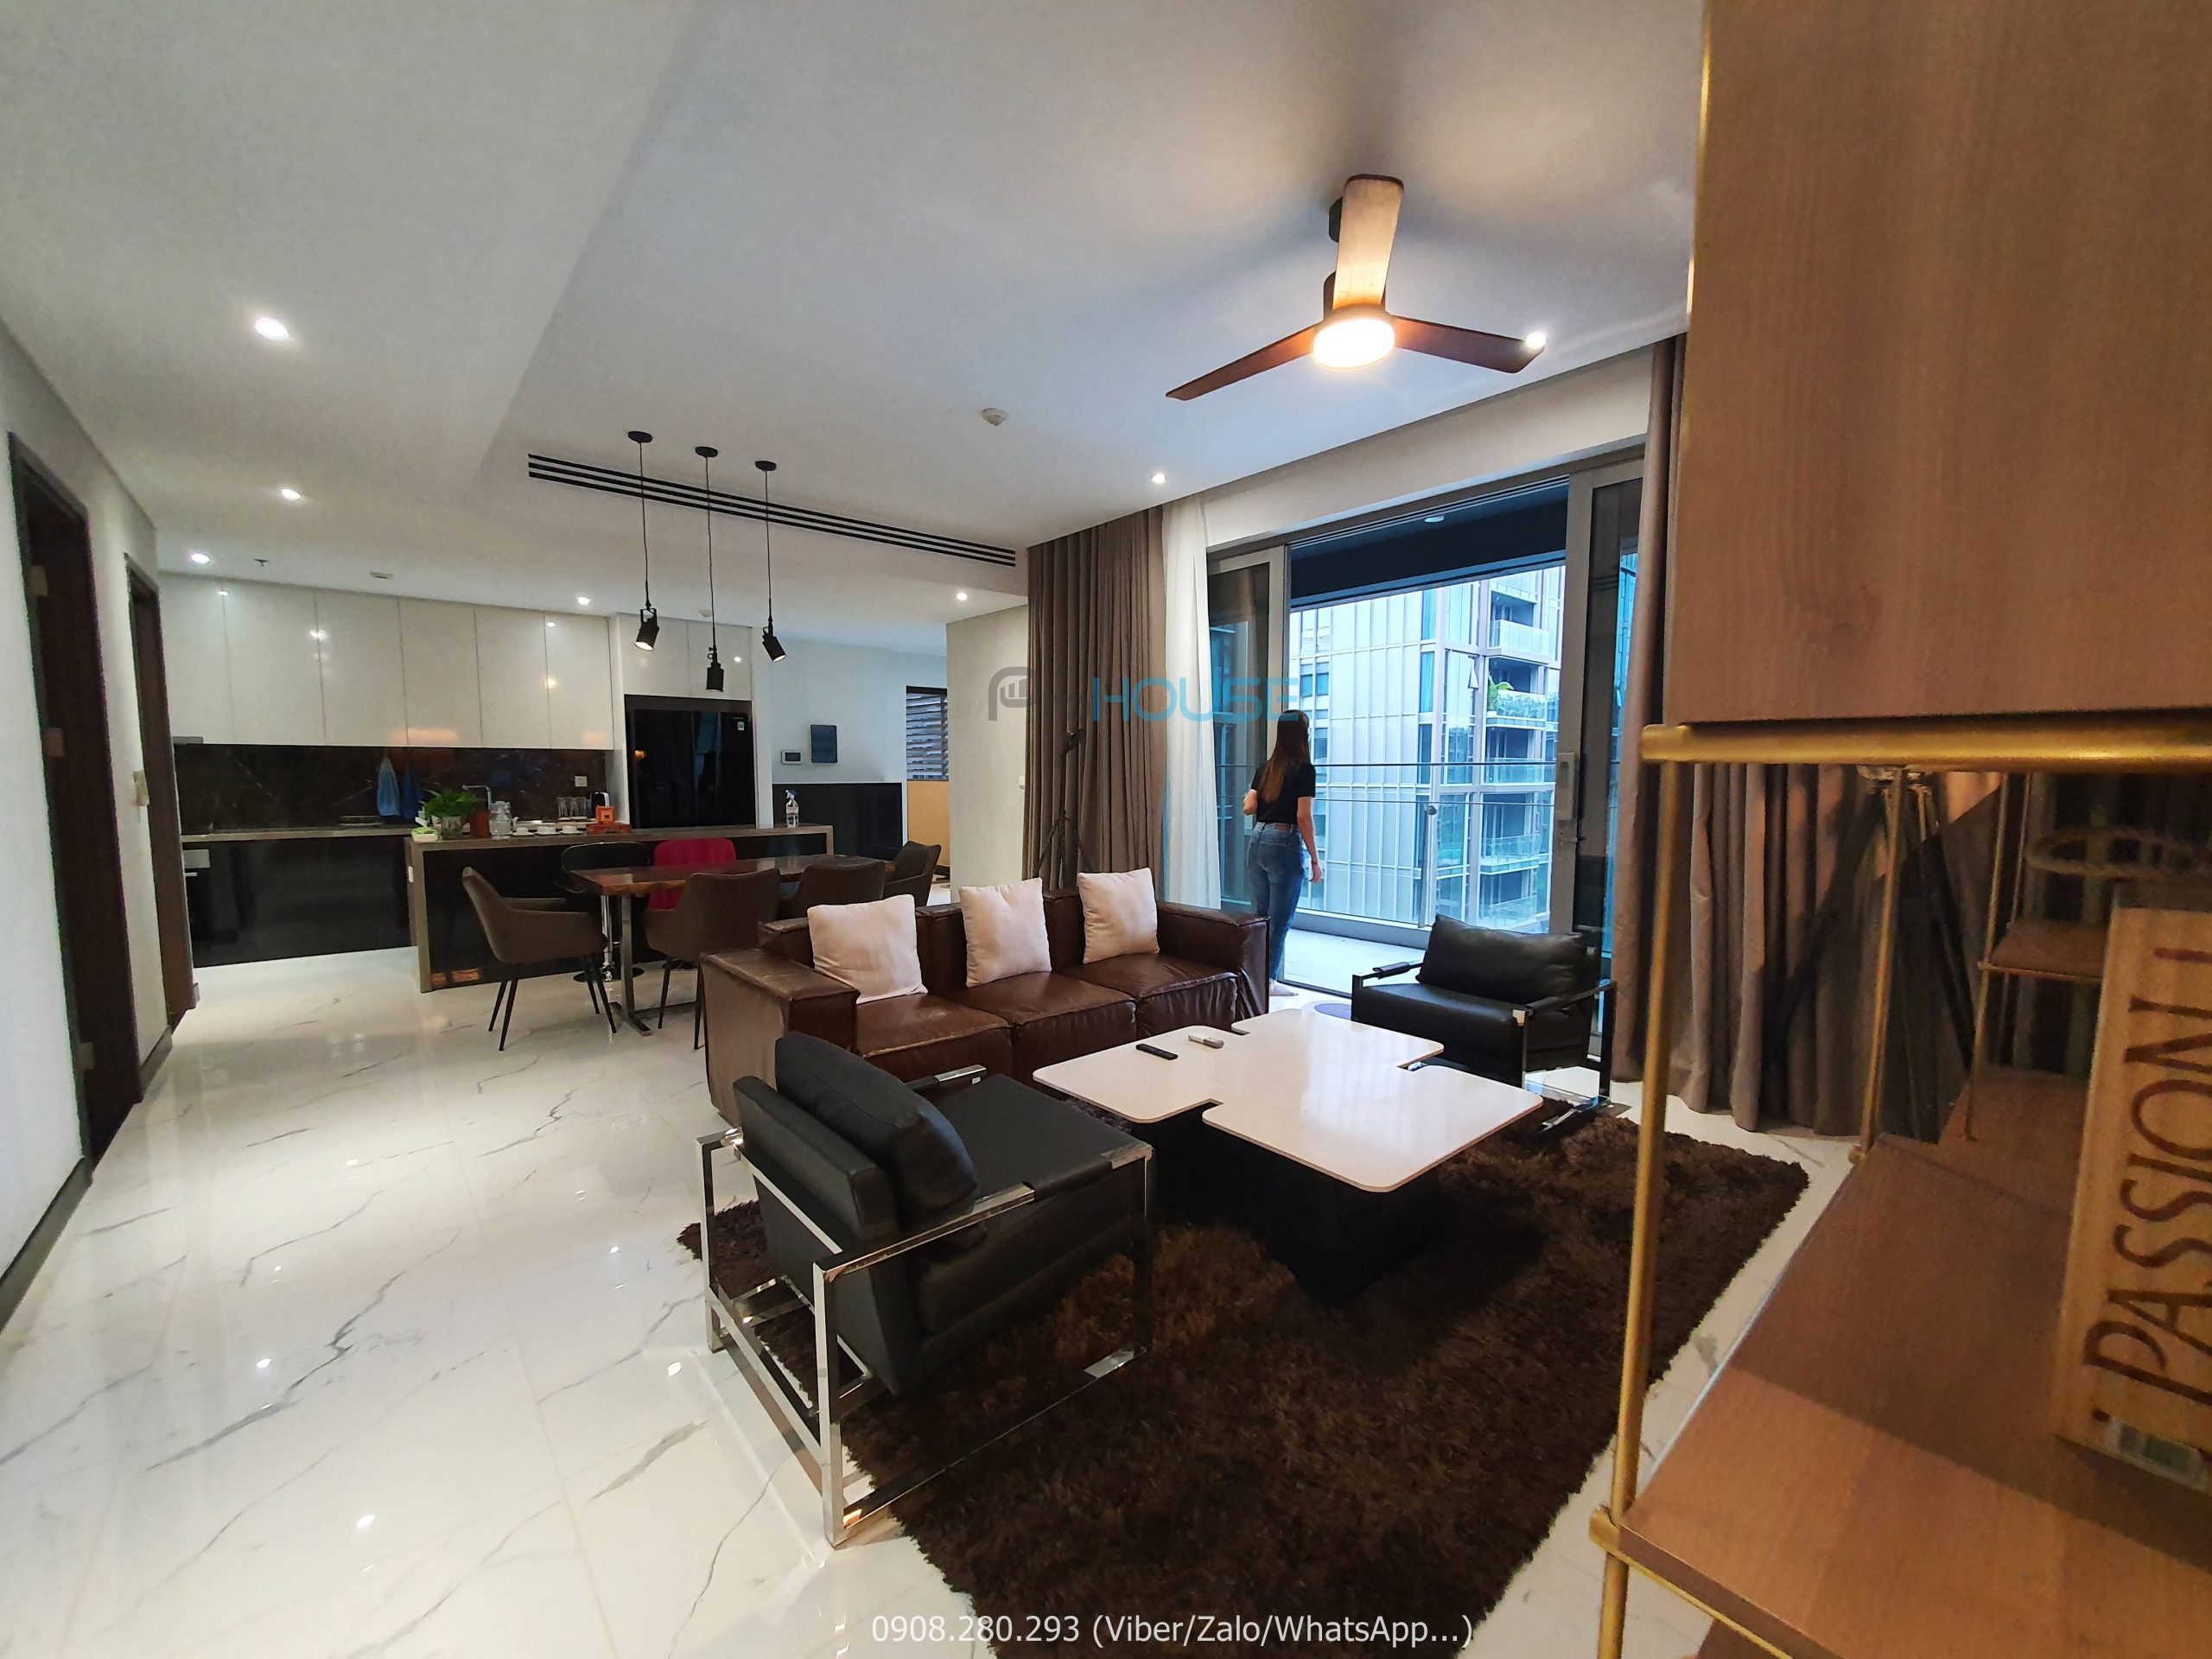 Amazing 3 bedroom apartment for rent in Empire City